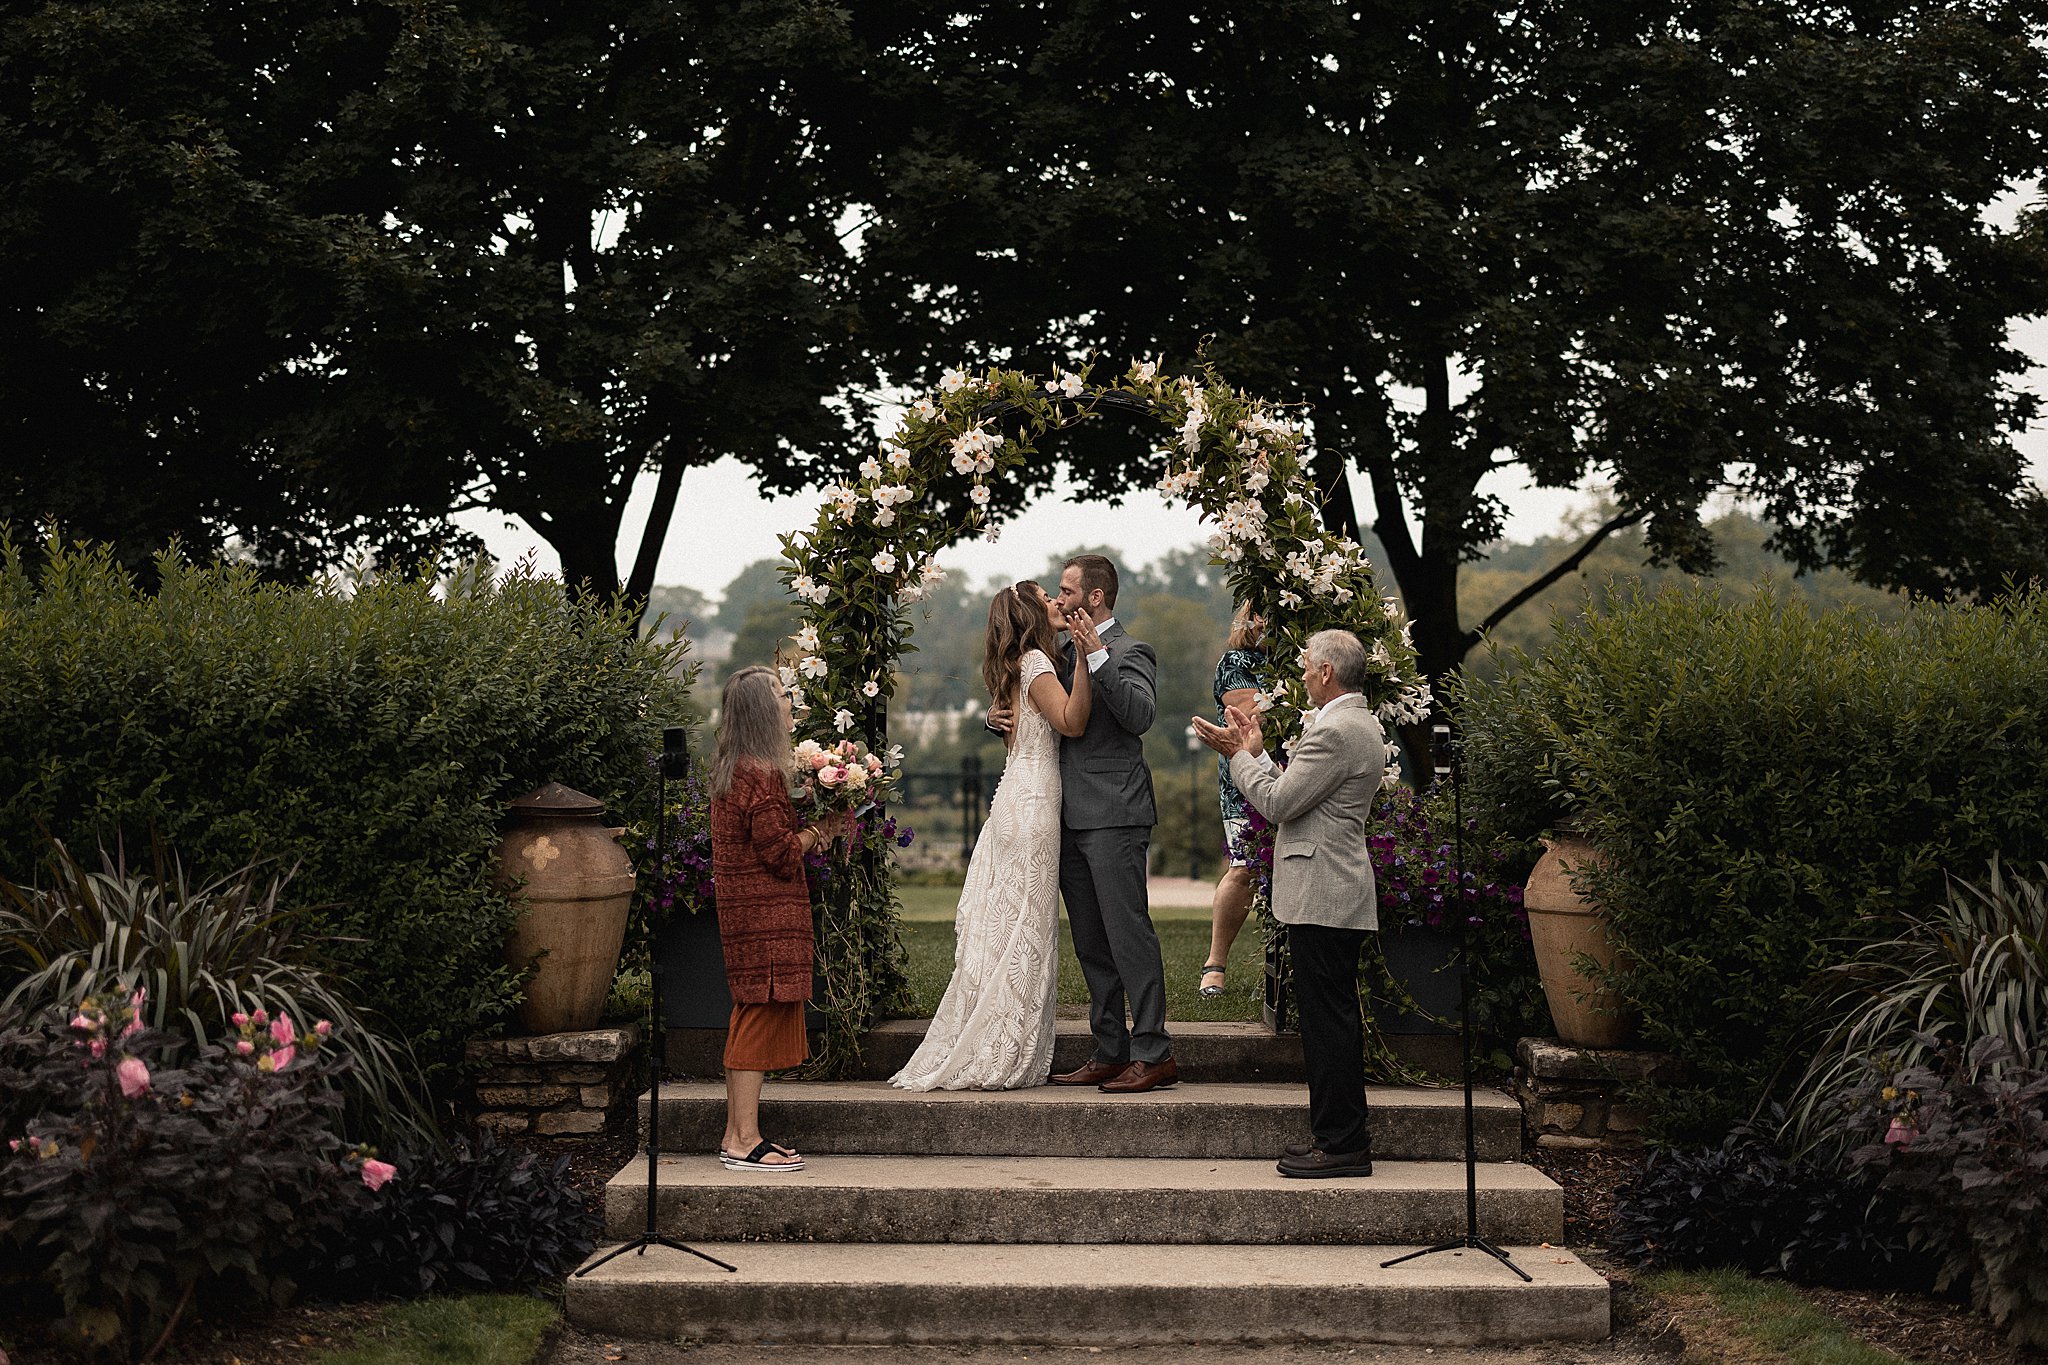 Bride & groom kiss in garden ceremony with two people and judge